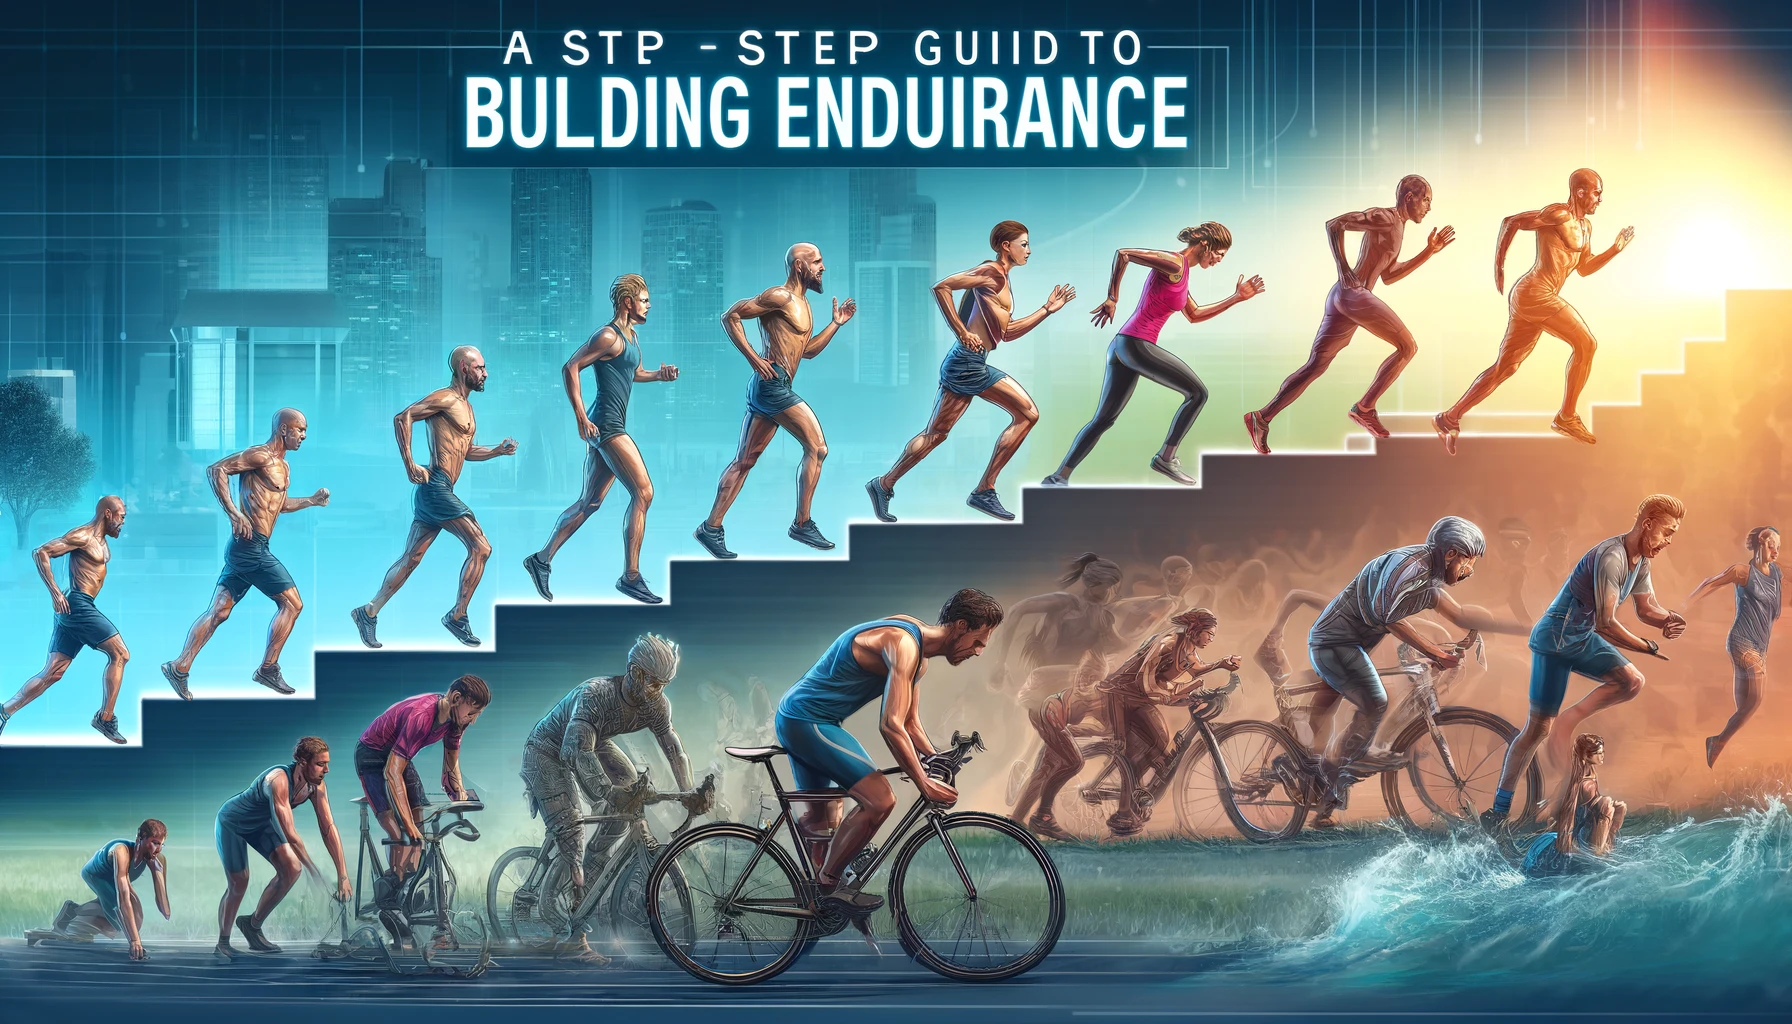 How Can I Build Endurance With This Step-by-Step Guide?